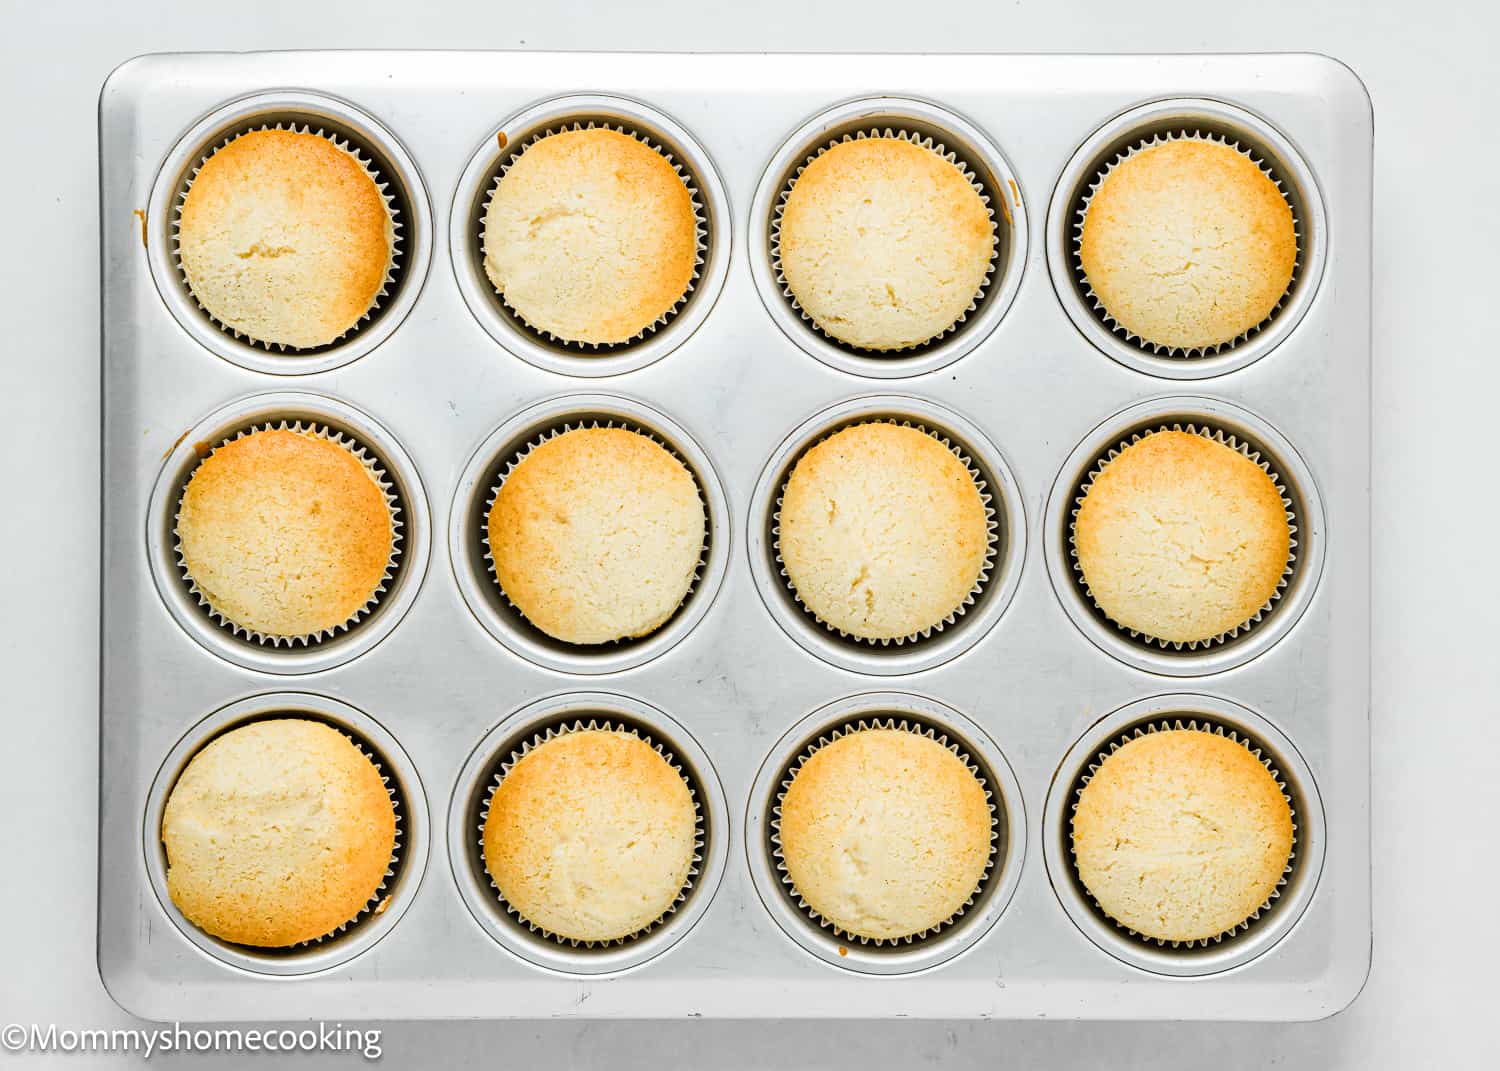 baked dairy-free and egg-free Vanilla Cupcakes in a cupcake pan.